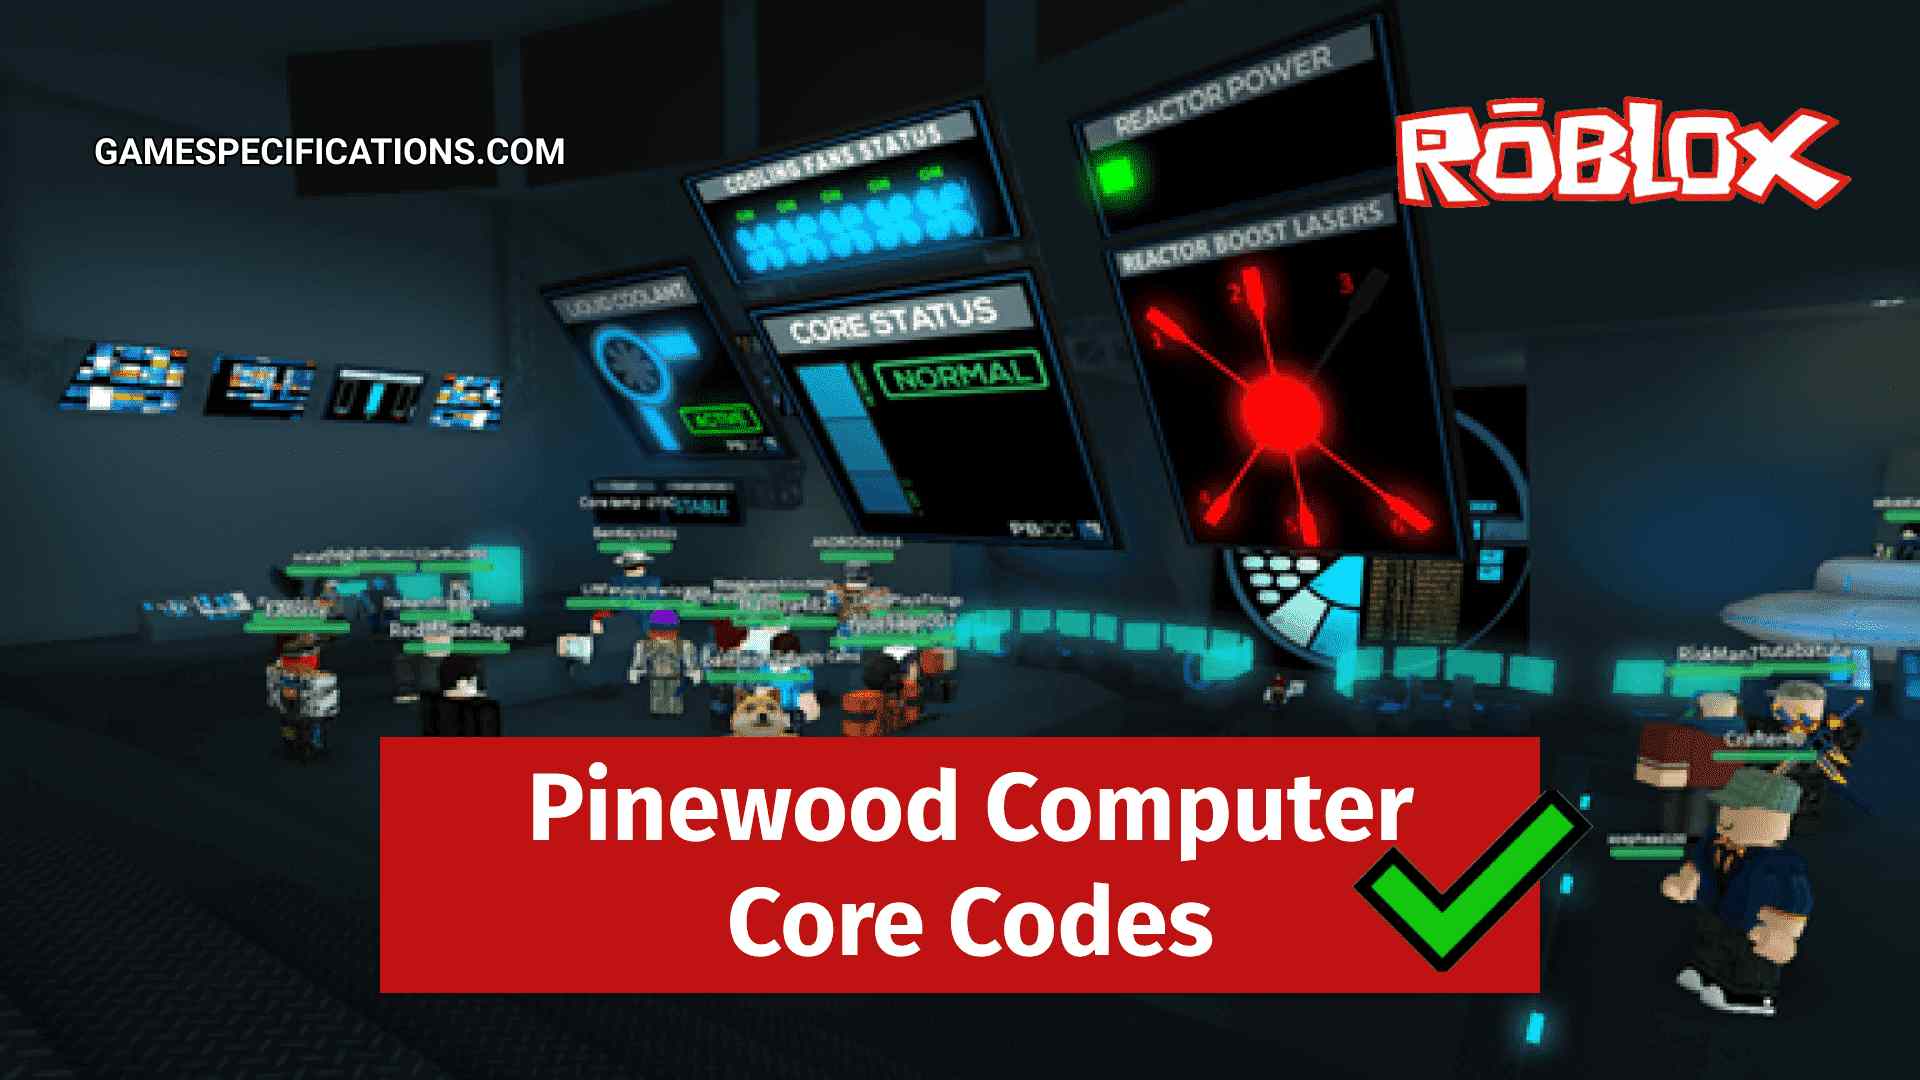 Roblox Pinewood Computer Core Codes July 2021 Game Specifications - roblox wizard life uncopylocked